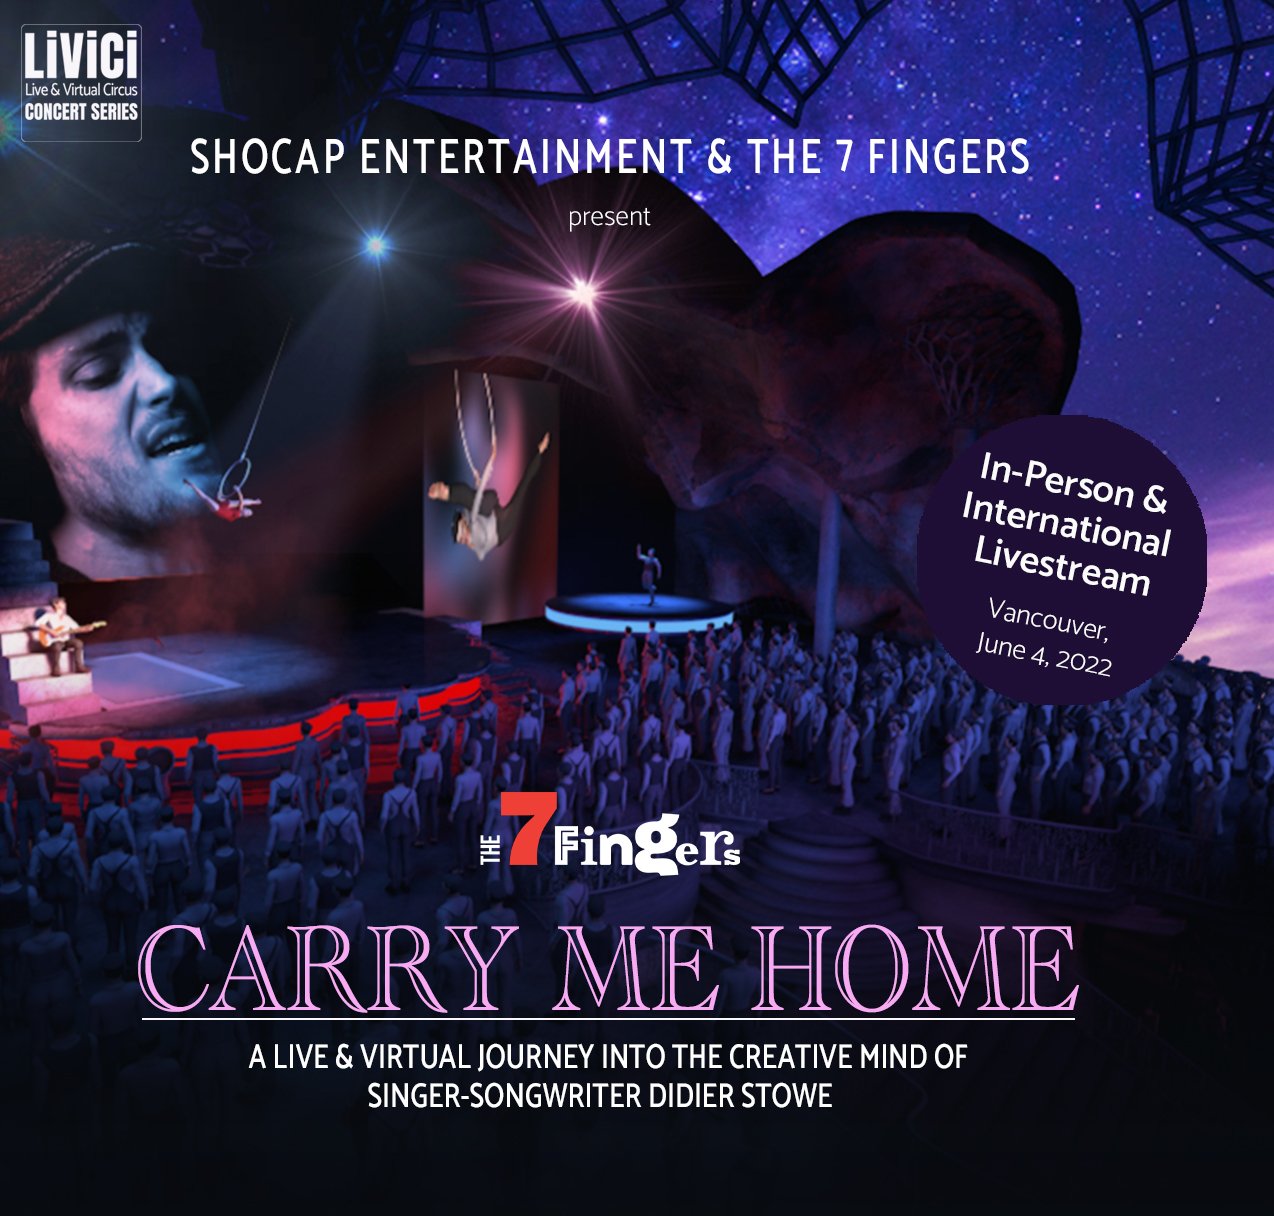 The 7 Fingers and Shocap Entertainment debut XR hybrid circus show, LiViCi, Carry Me Home onstage and online to audiences worldwide this June — Shocap Entertainment, Ltd.